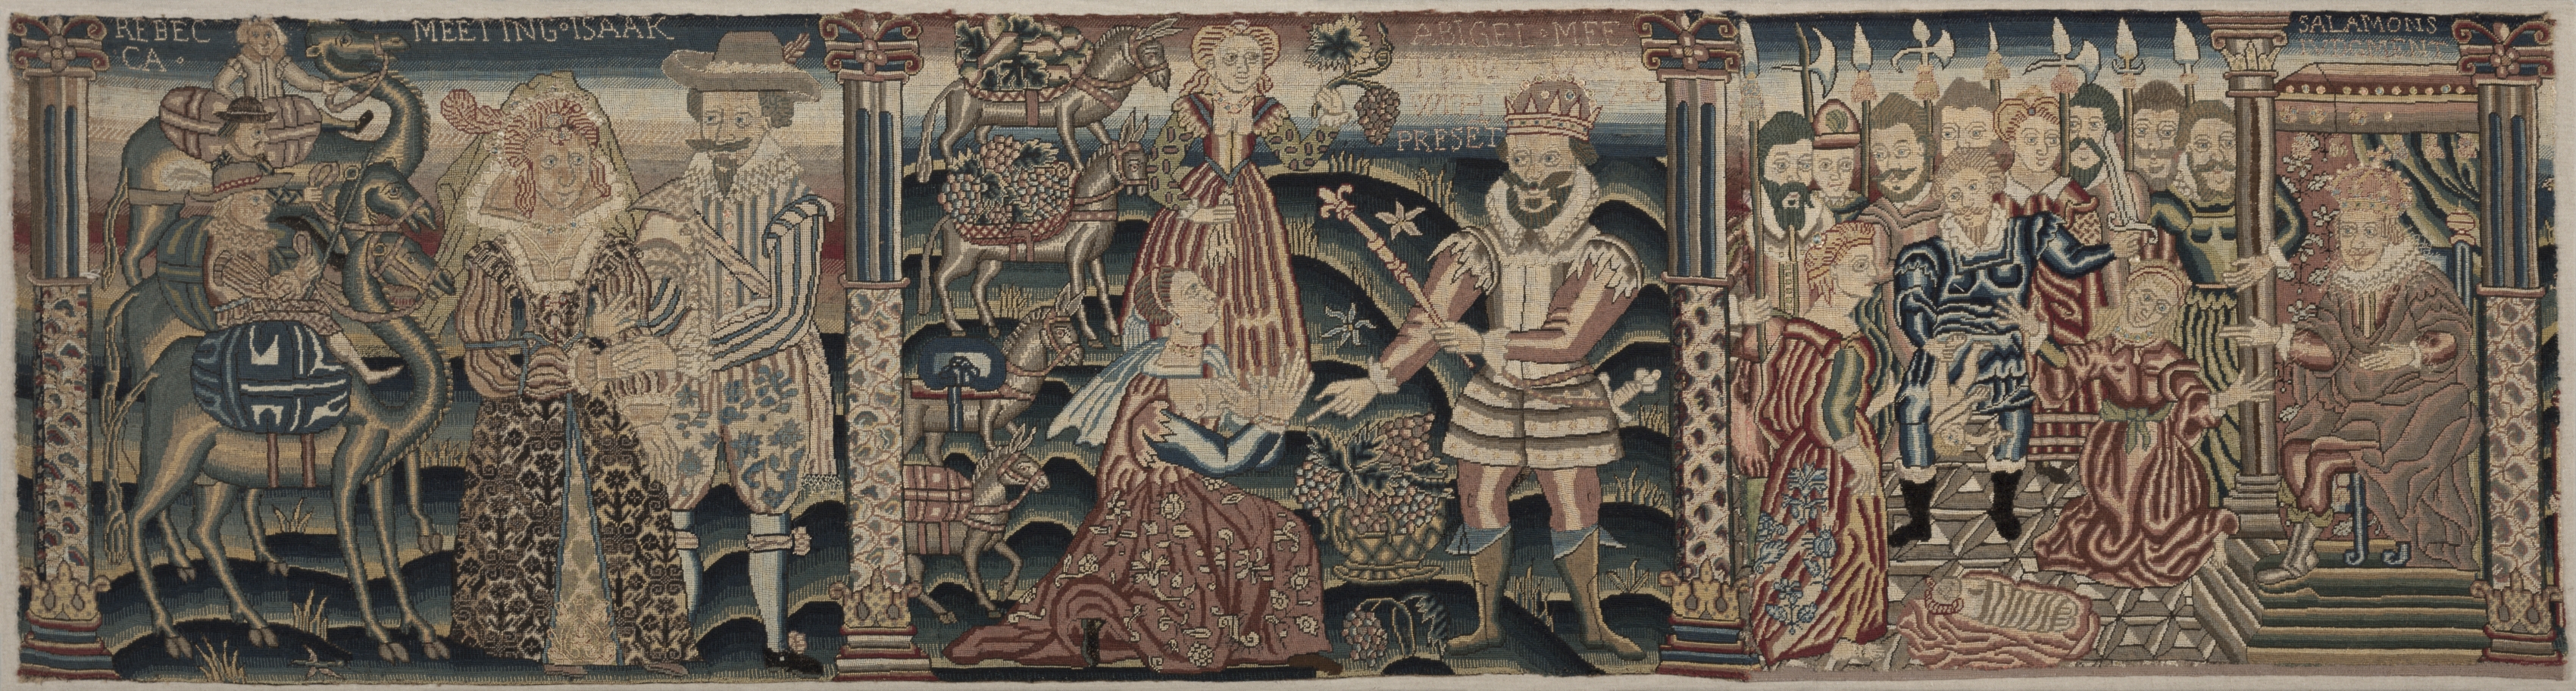 Section of an Embroidered Frieze: Rebecca Meeting Isaac, Abigail Meeting David with a Present, The Judgment of Solomon